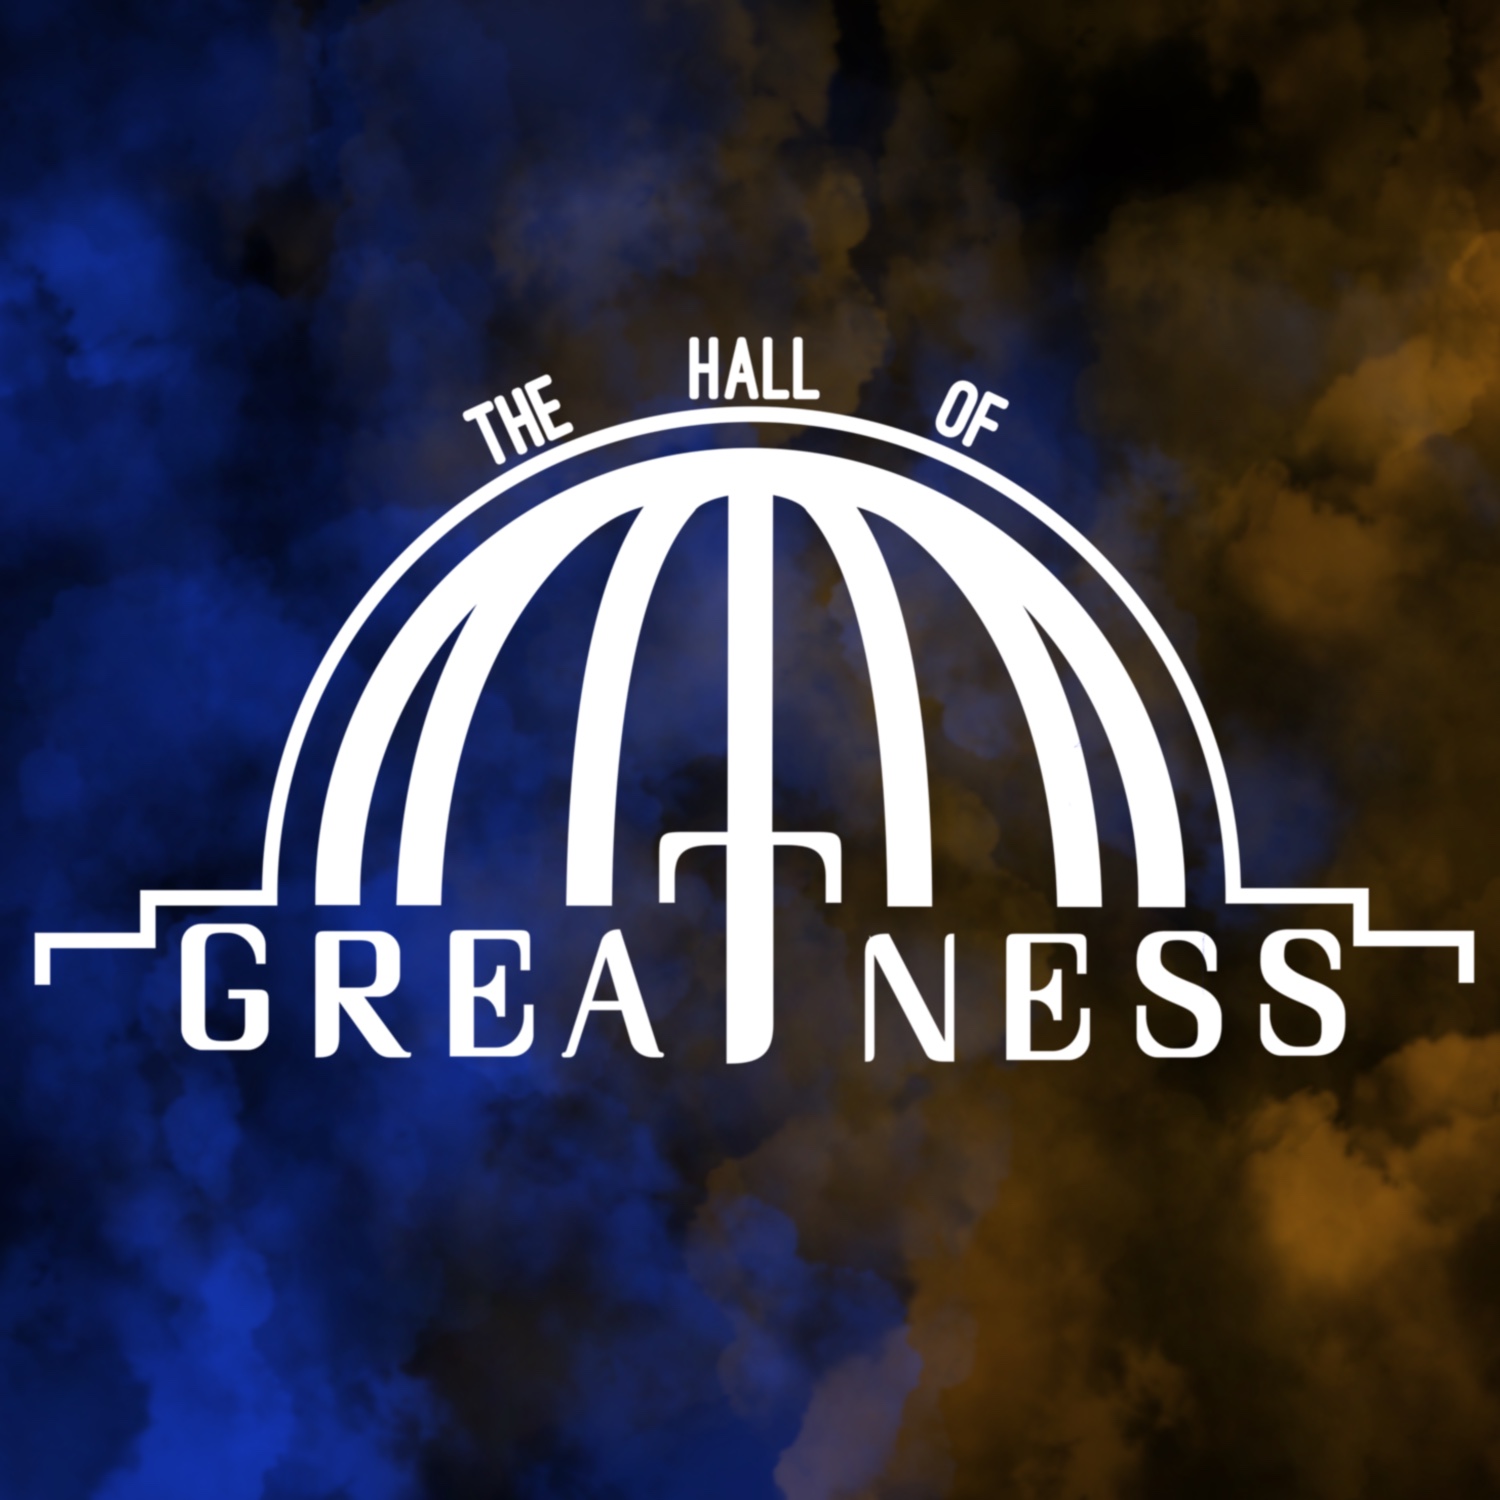 The Hall of Greatness